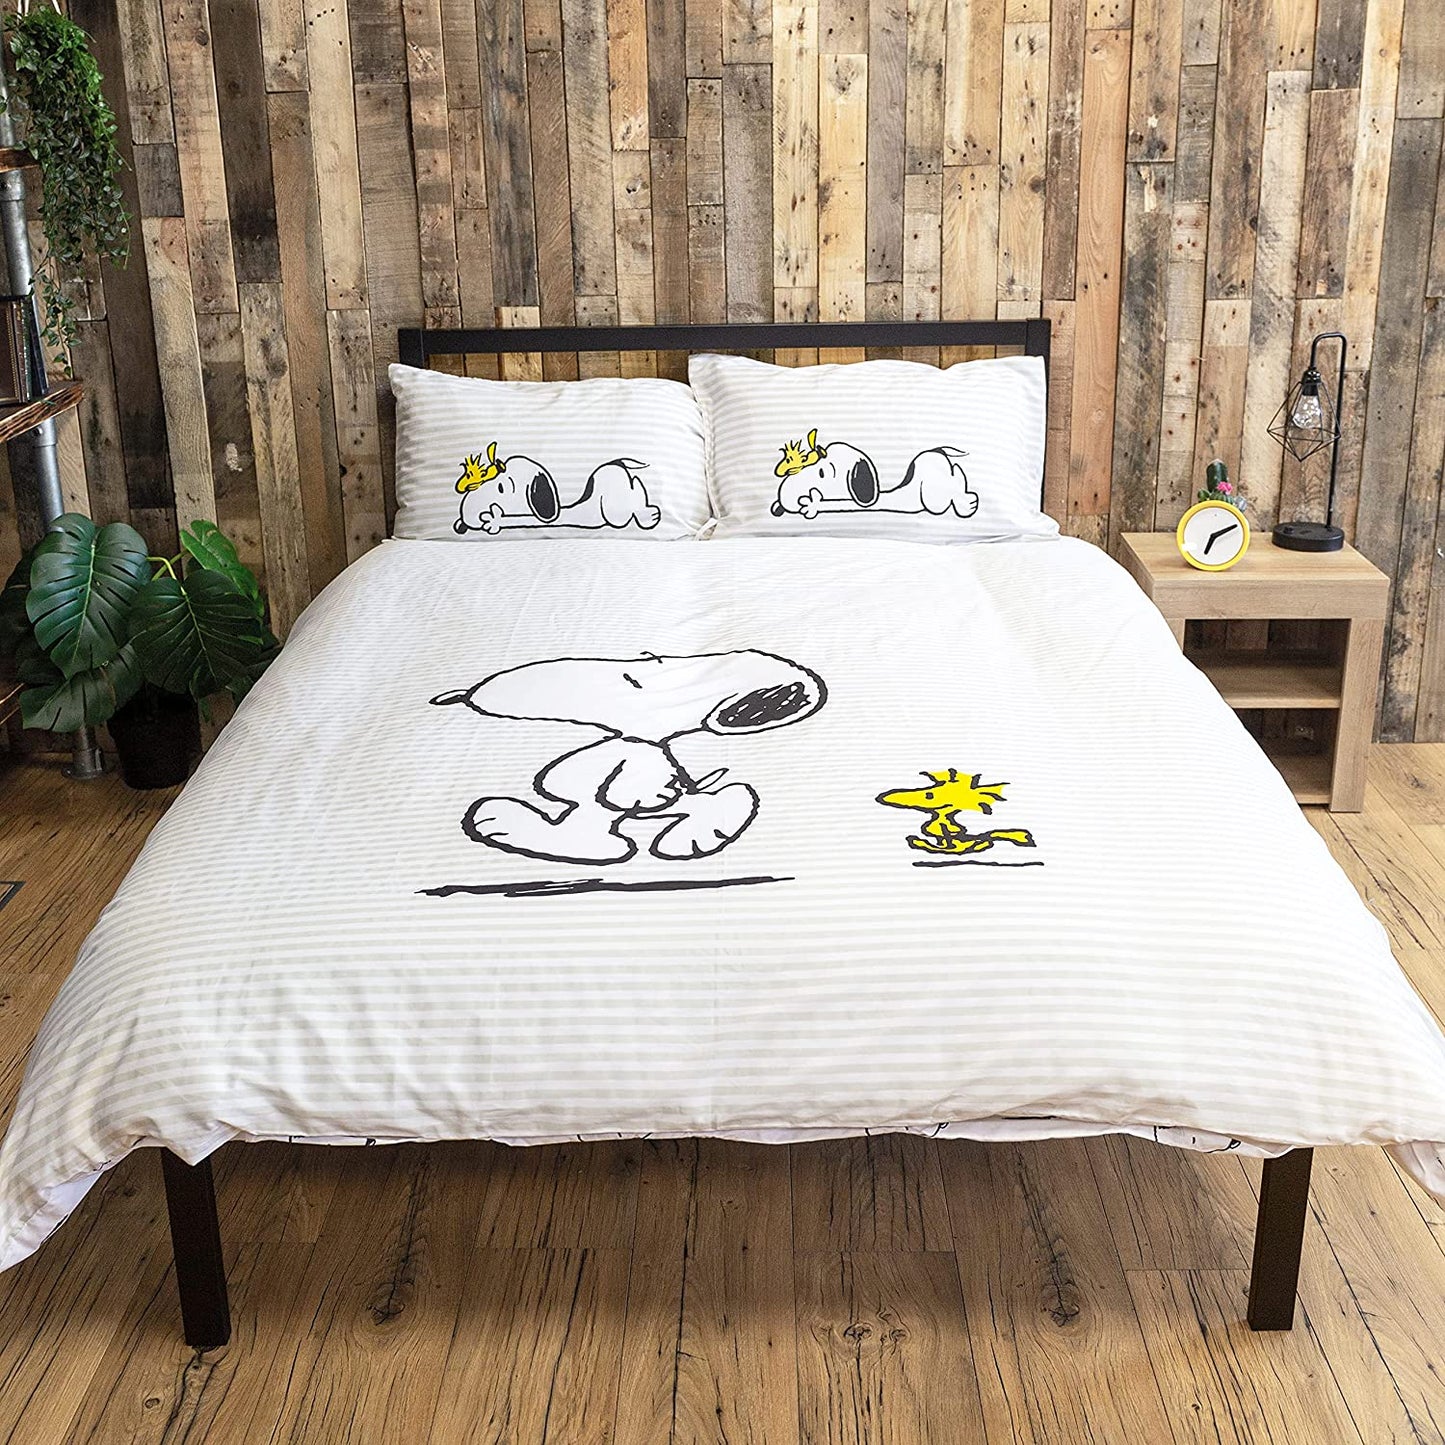 Double Bed Snoopy Peanuts Official Panel Duvet Cover Reversible Bedding Set